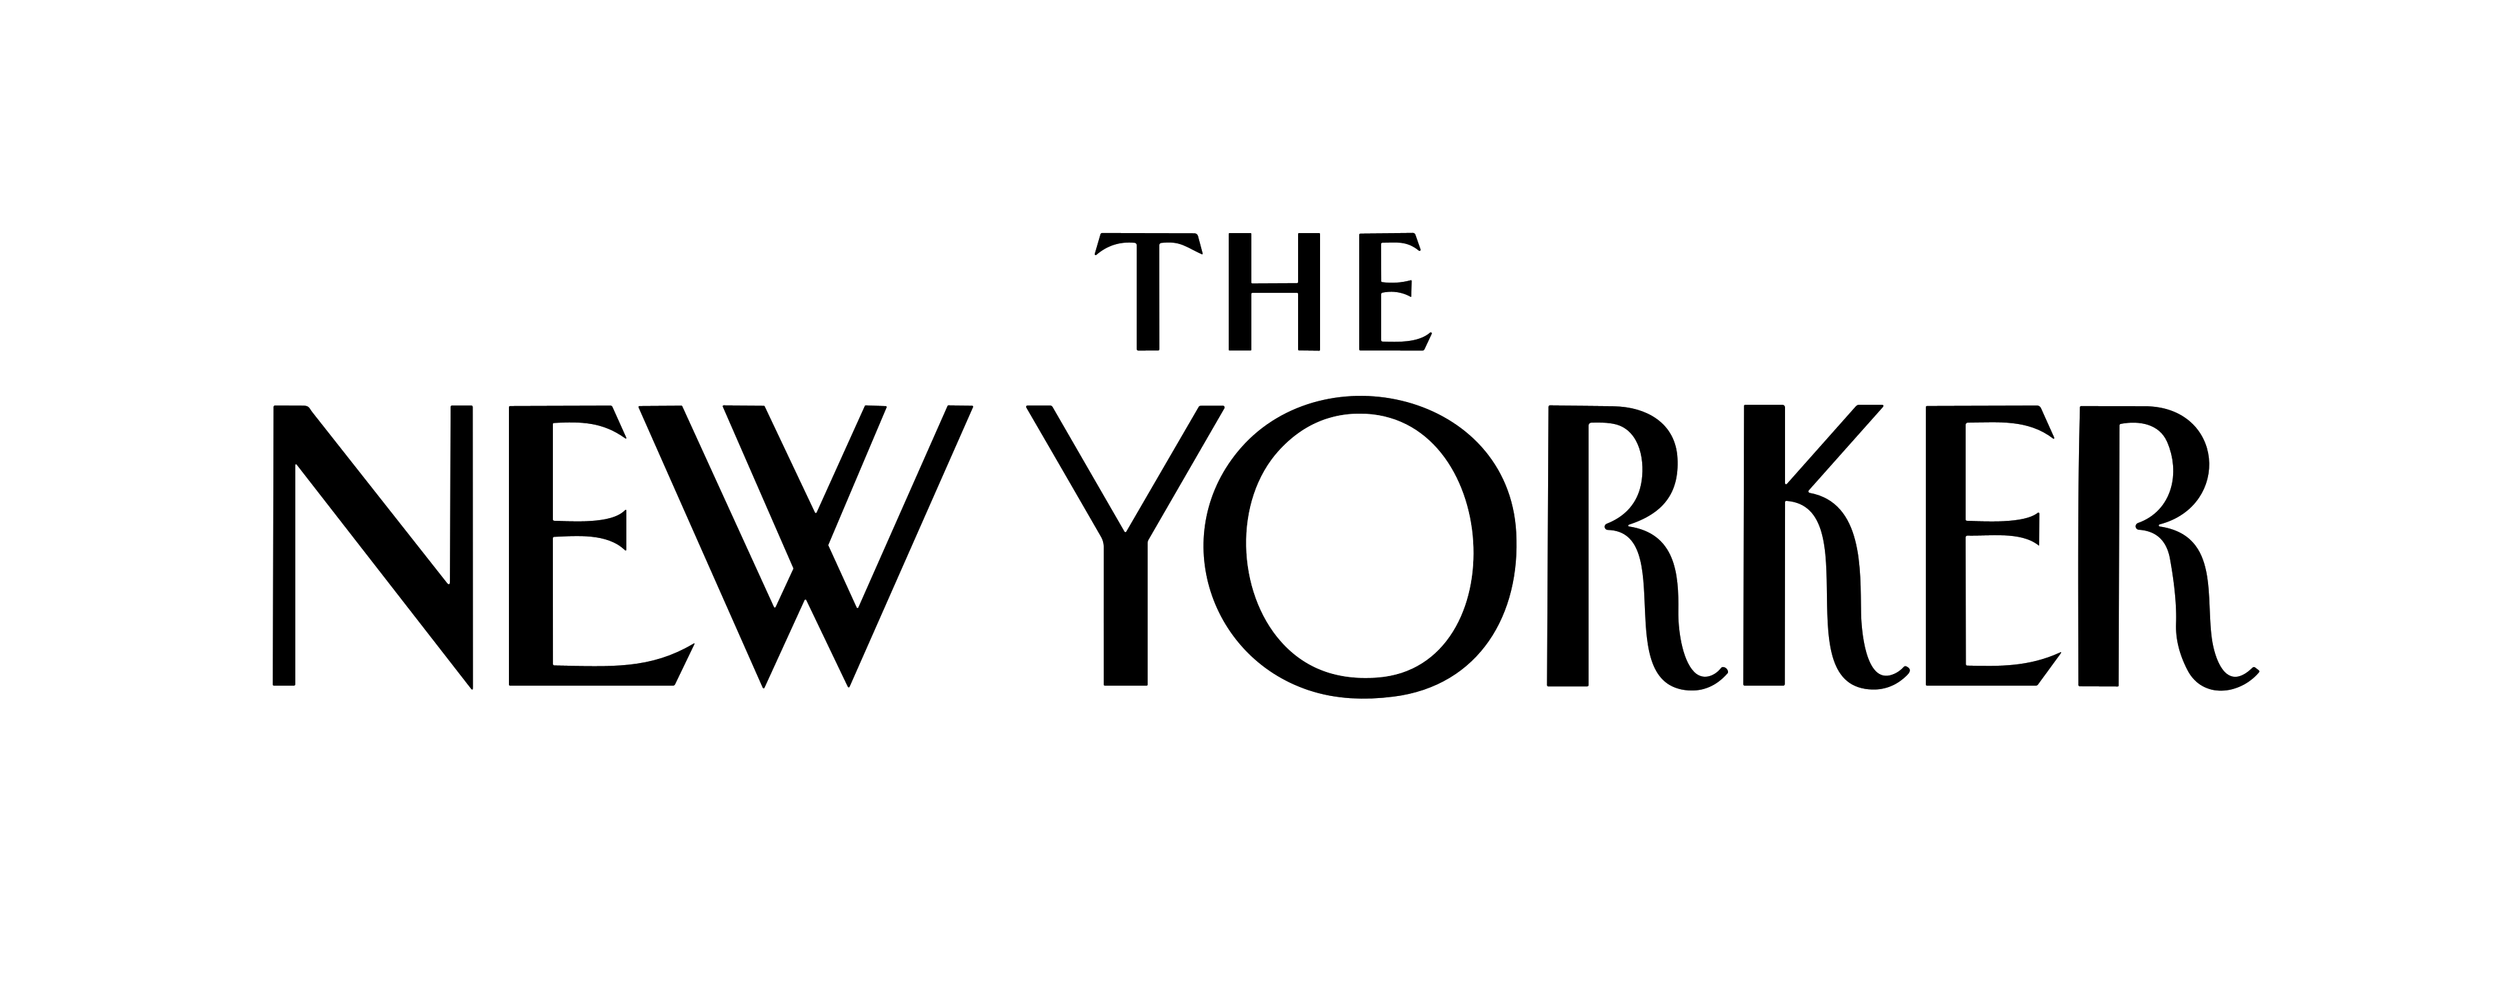 The New Yorker.png